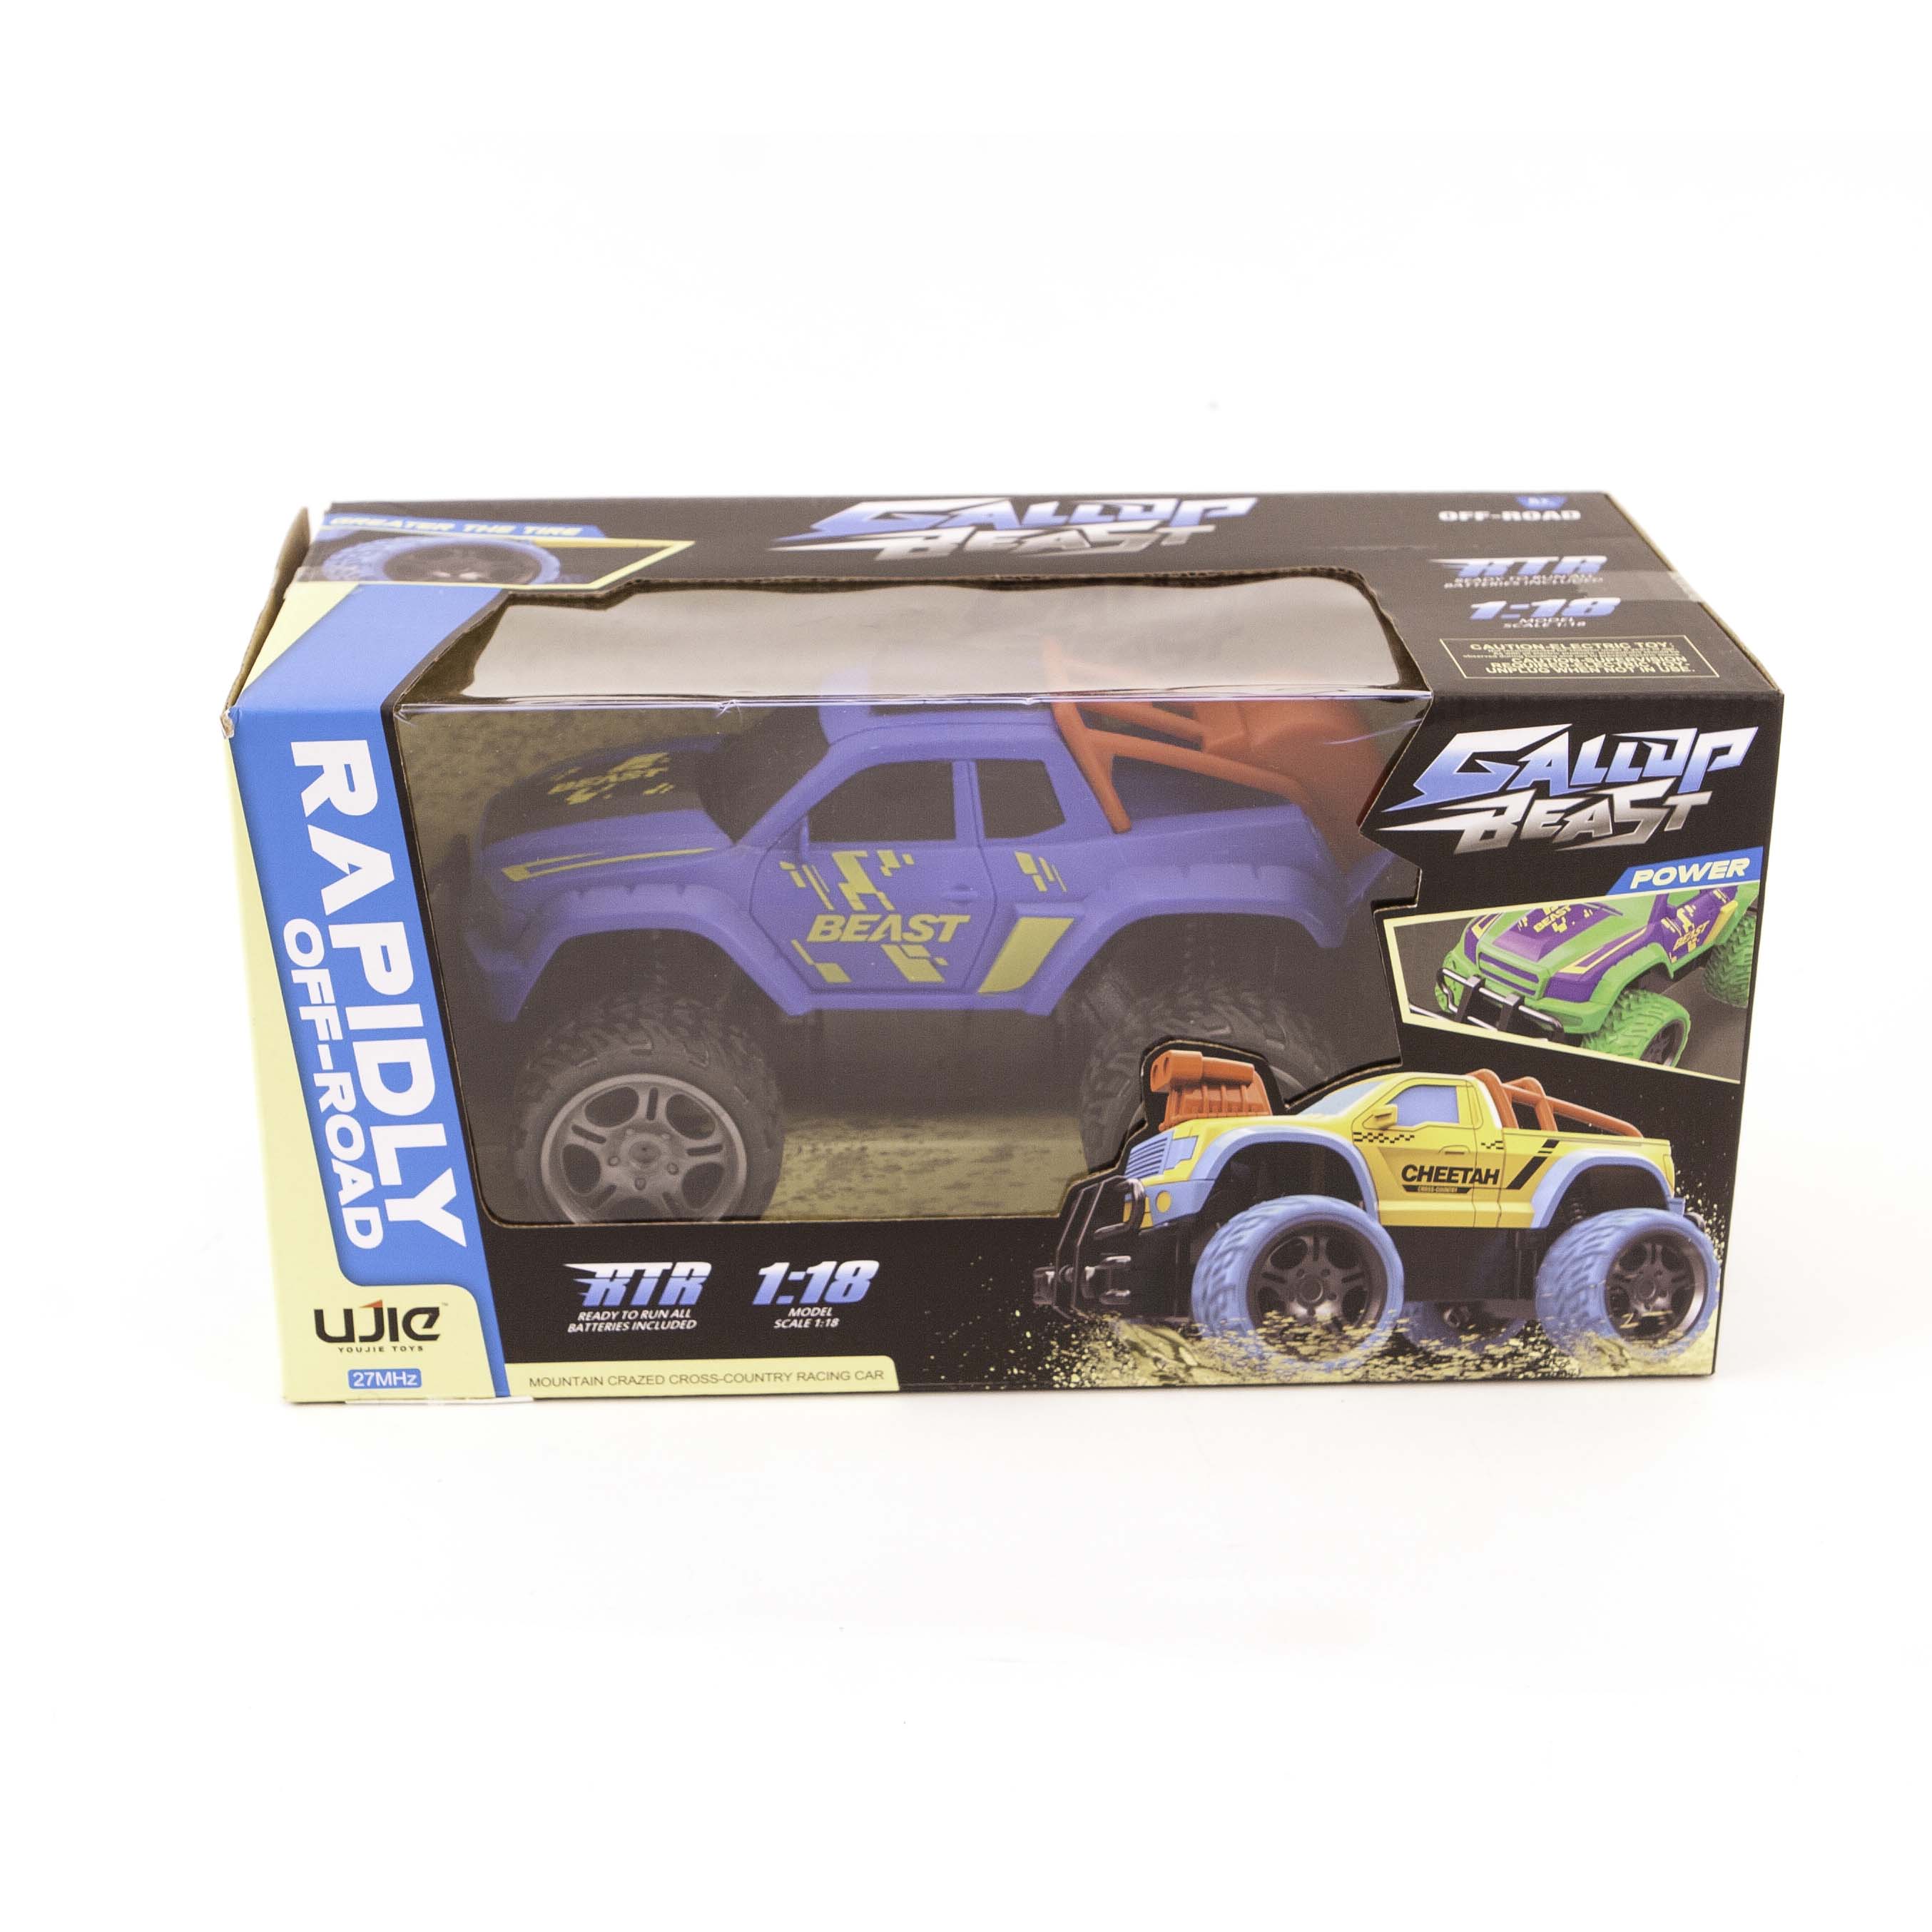 R/C OFF-ROAD BUGGY 1:18